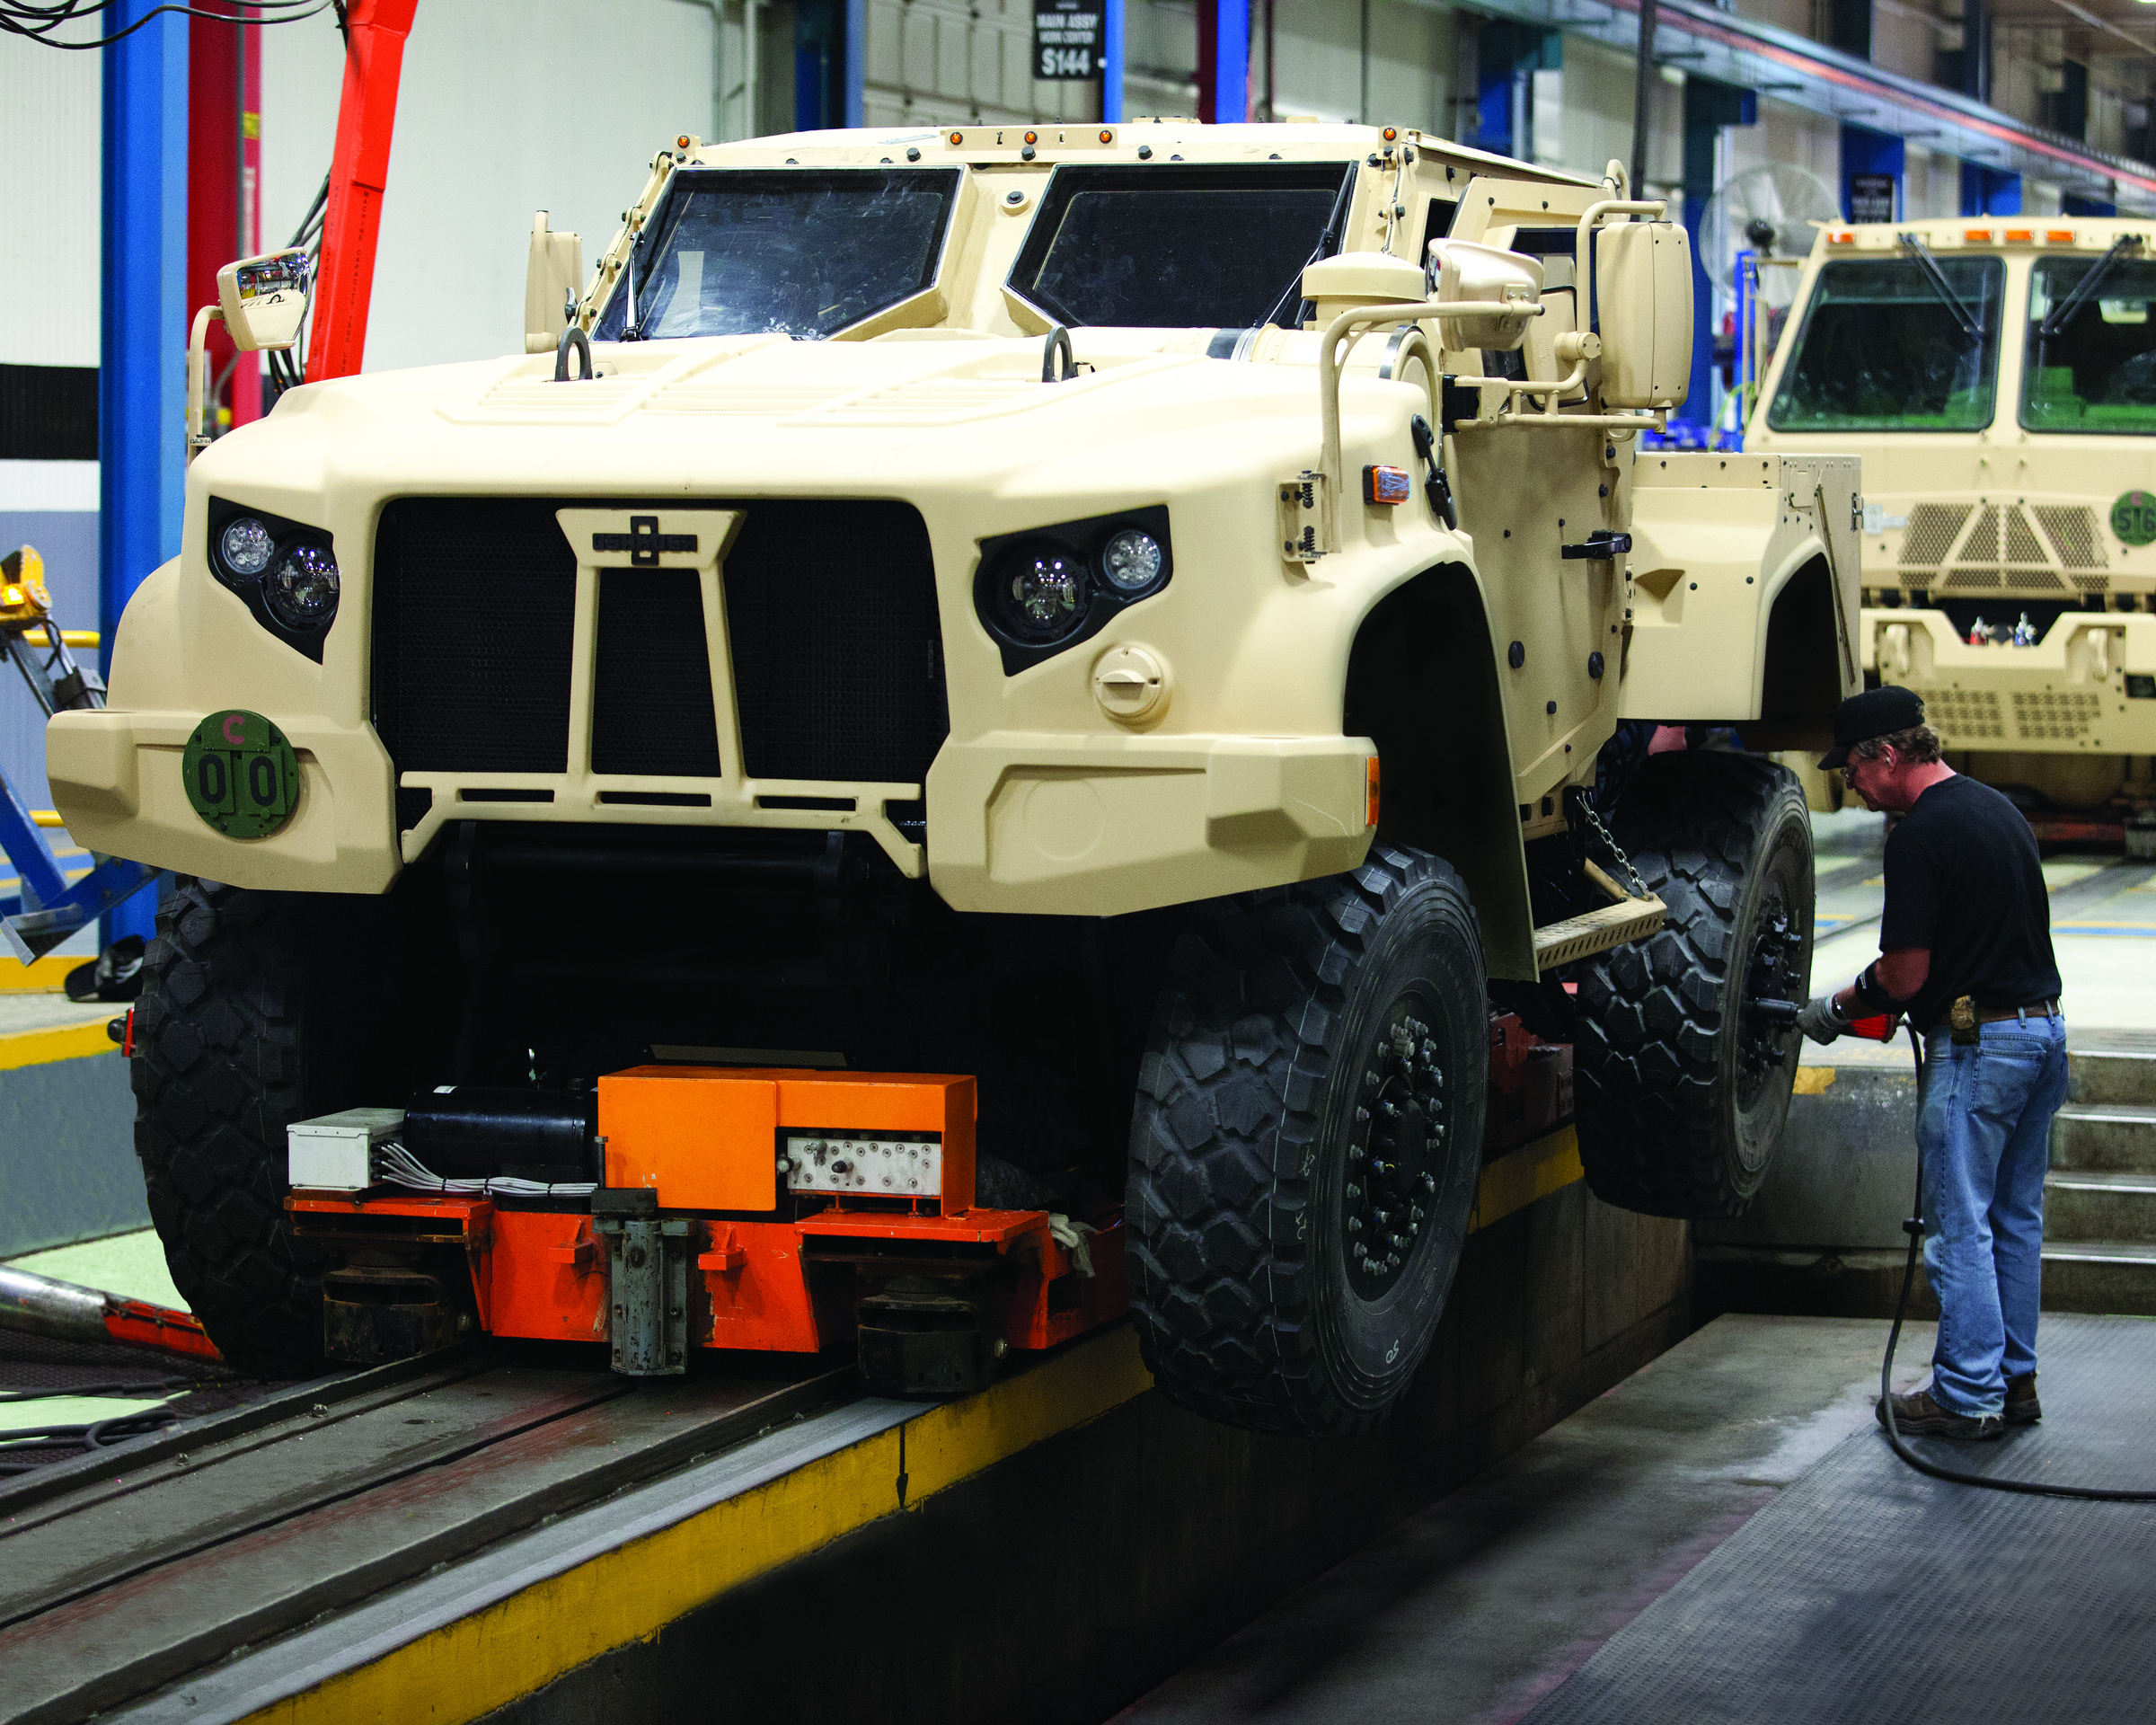 Oshkosh Defense says it is “laser focused” on keeping manufacturing of the Joint Light Tactical Vehicle (JLTV) in Wisconsin